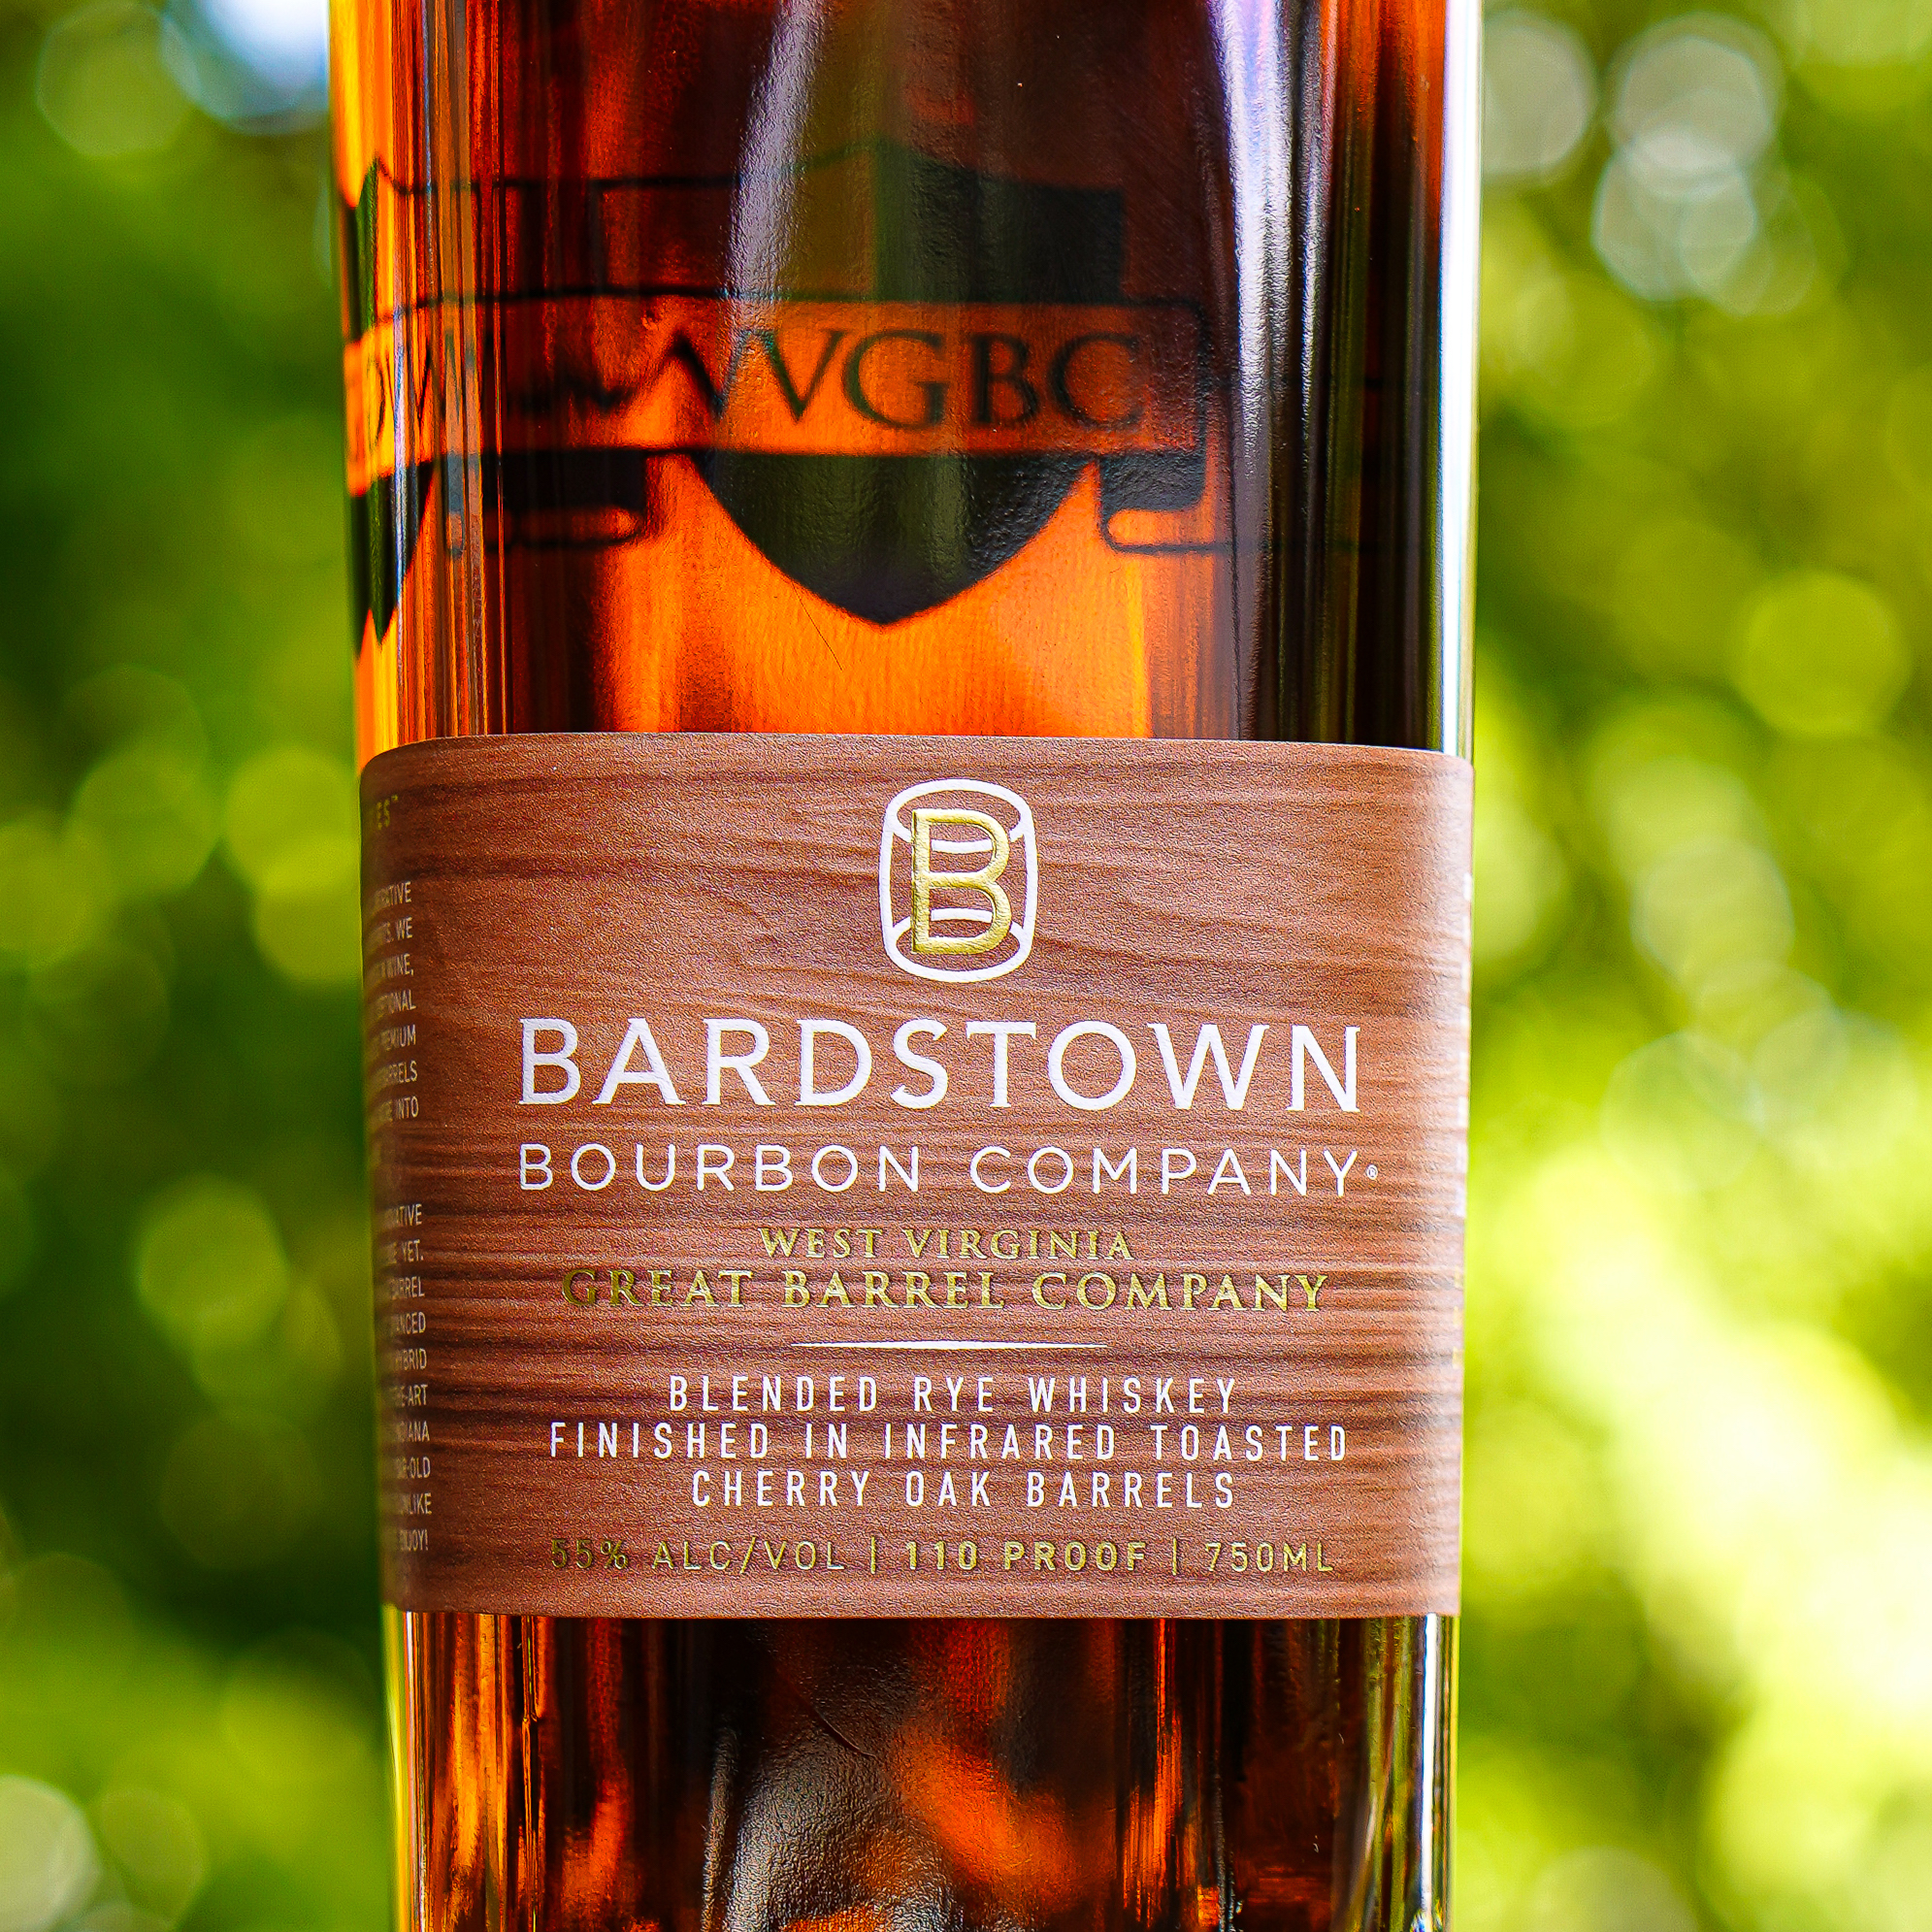 Bardstown Bourbon Company’s Latest Collaboration Focuses On The Barrel